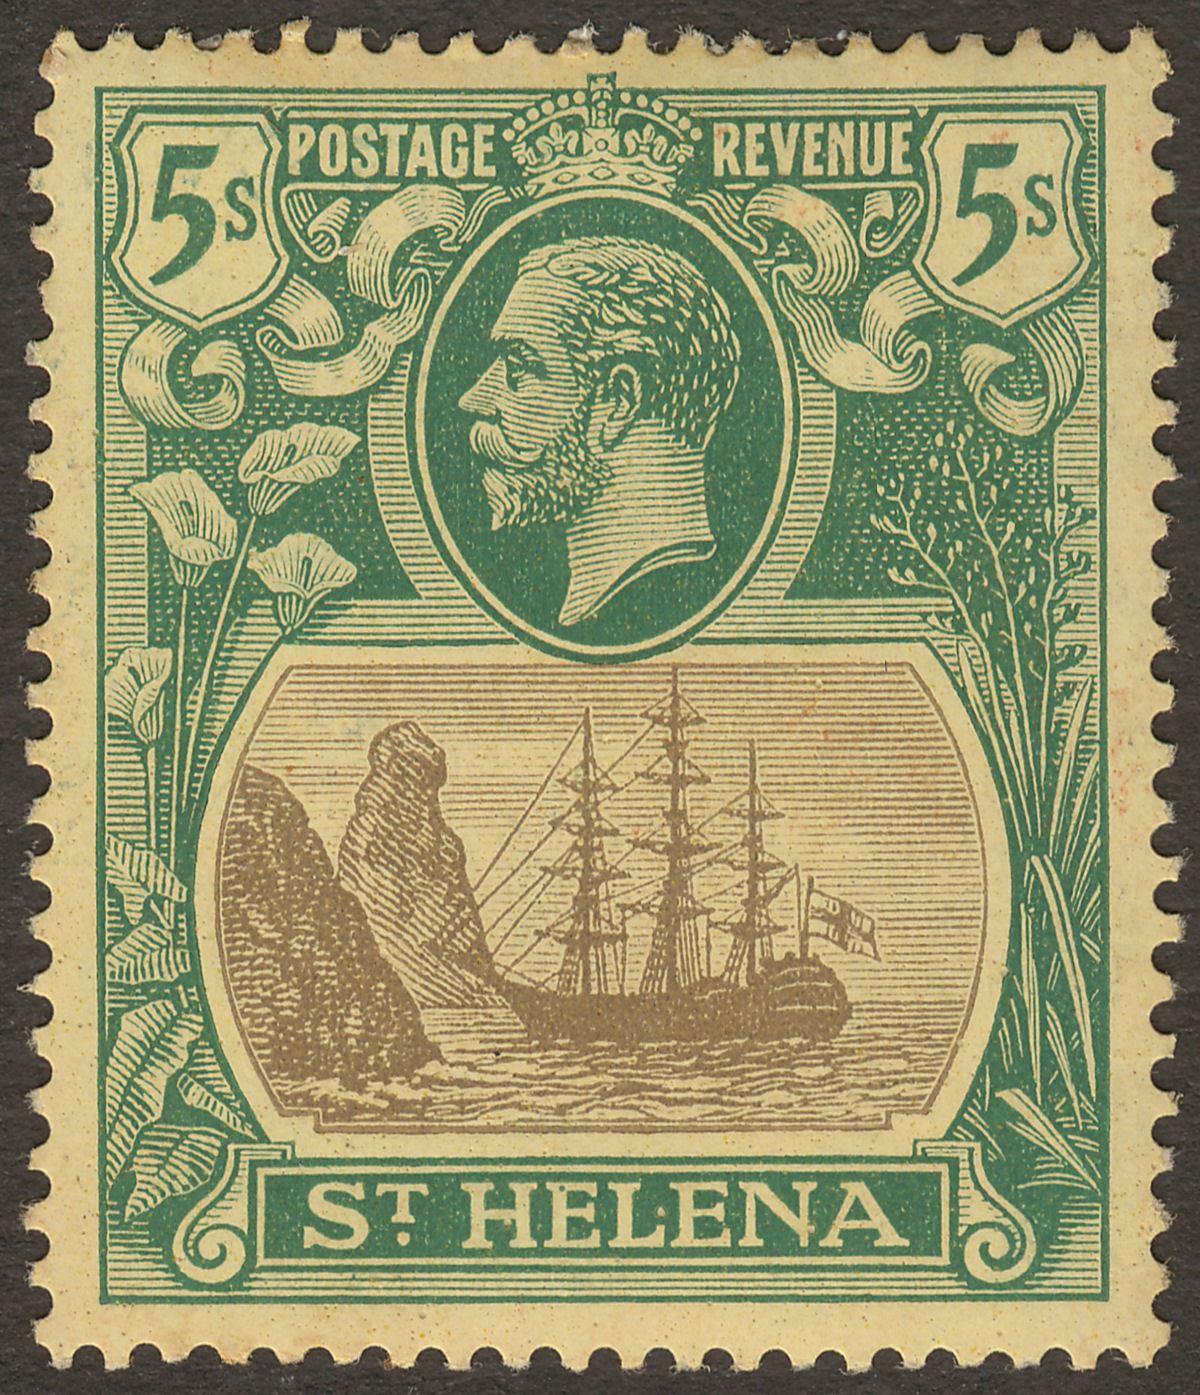 St Helena 1922 KGV 5sh Grey and Green on Yellow Mint SG95 cat £50